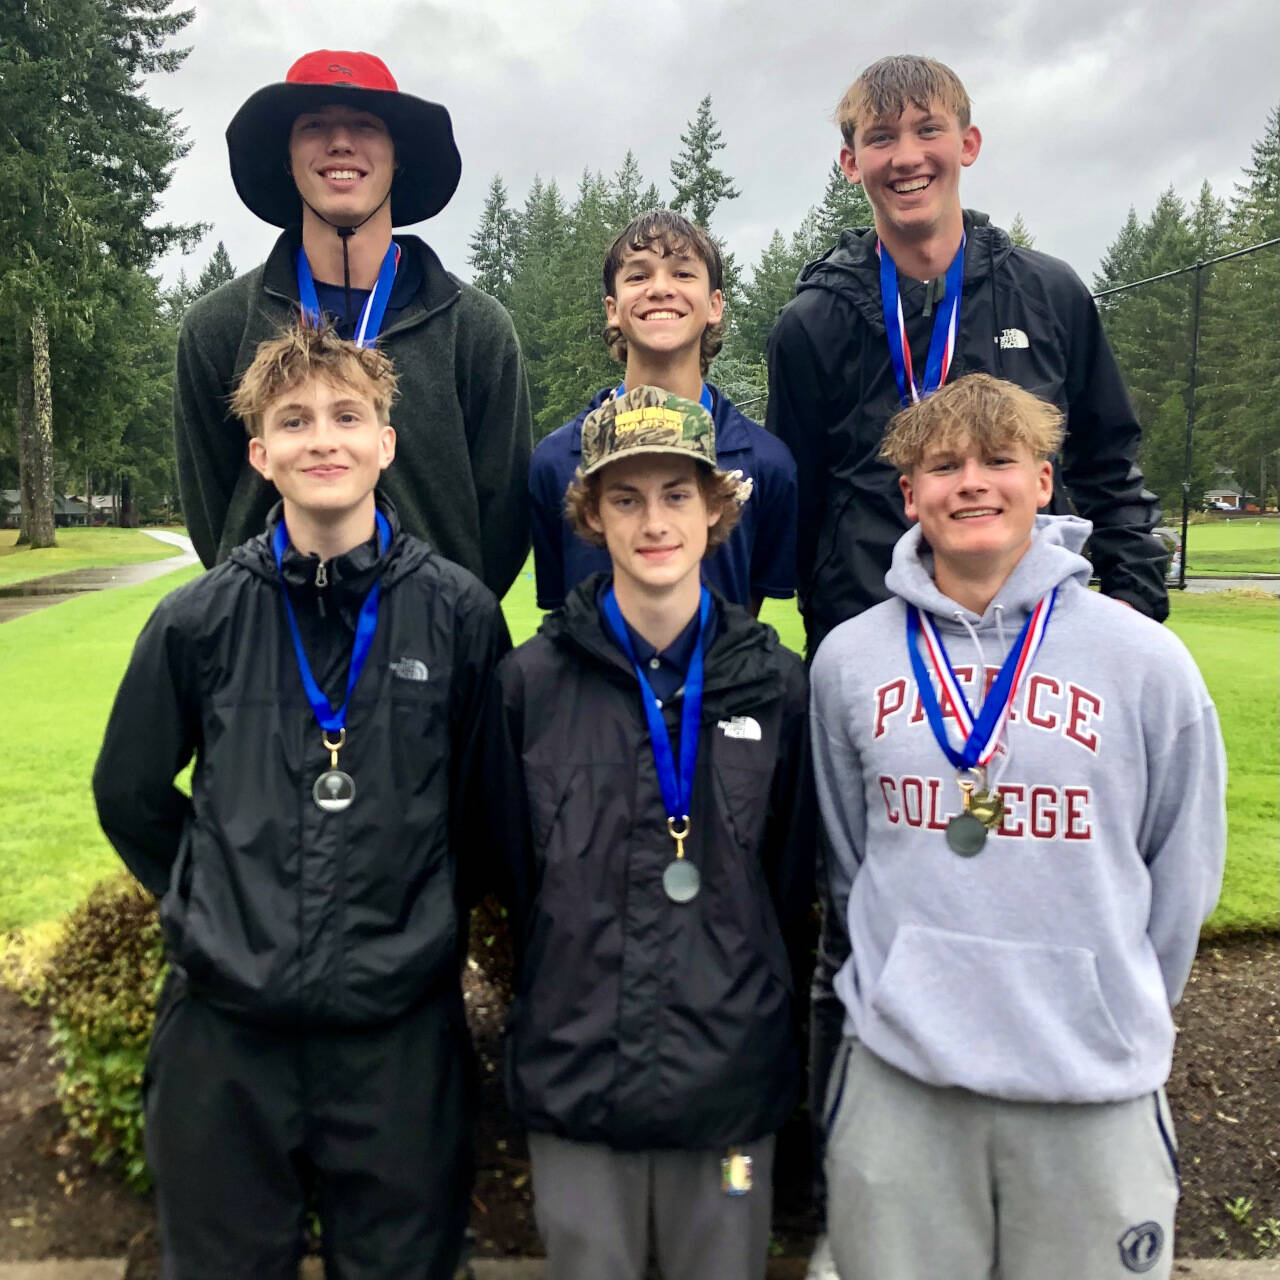 SUBMITTED PHOTO The Aberdeen Bobcats won the team title at the Sibley Scramble on Monday in Woodland. Pictured are (front row, from left): Skyler Dawson, Spencer Hill, Hunter Eisele. Back row: Charlie Ancich, Trevon Ramos, Baylor Ainsworth.